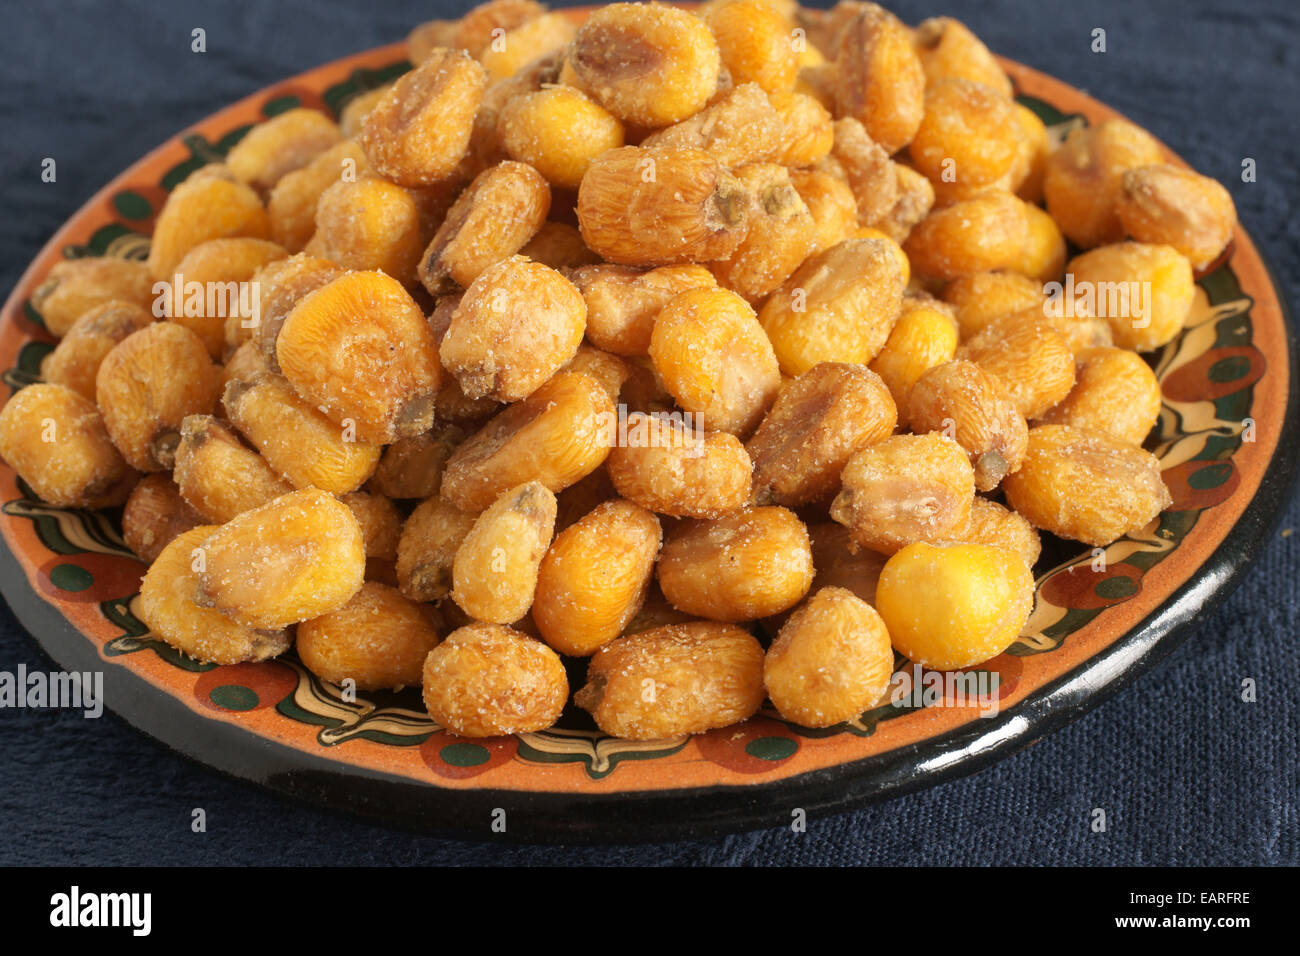 Corn Nuts a roasted or fried and seasoned maize snack known as Cancha in South America Stock Photo